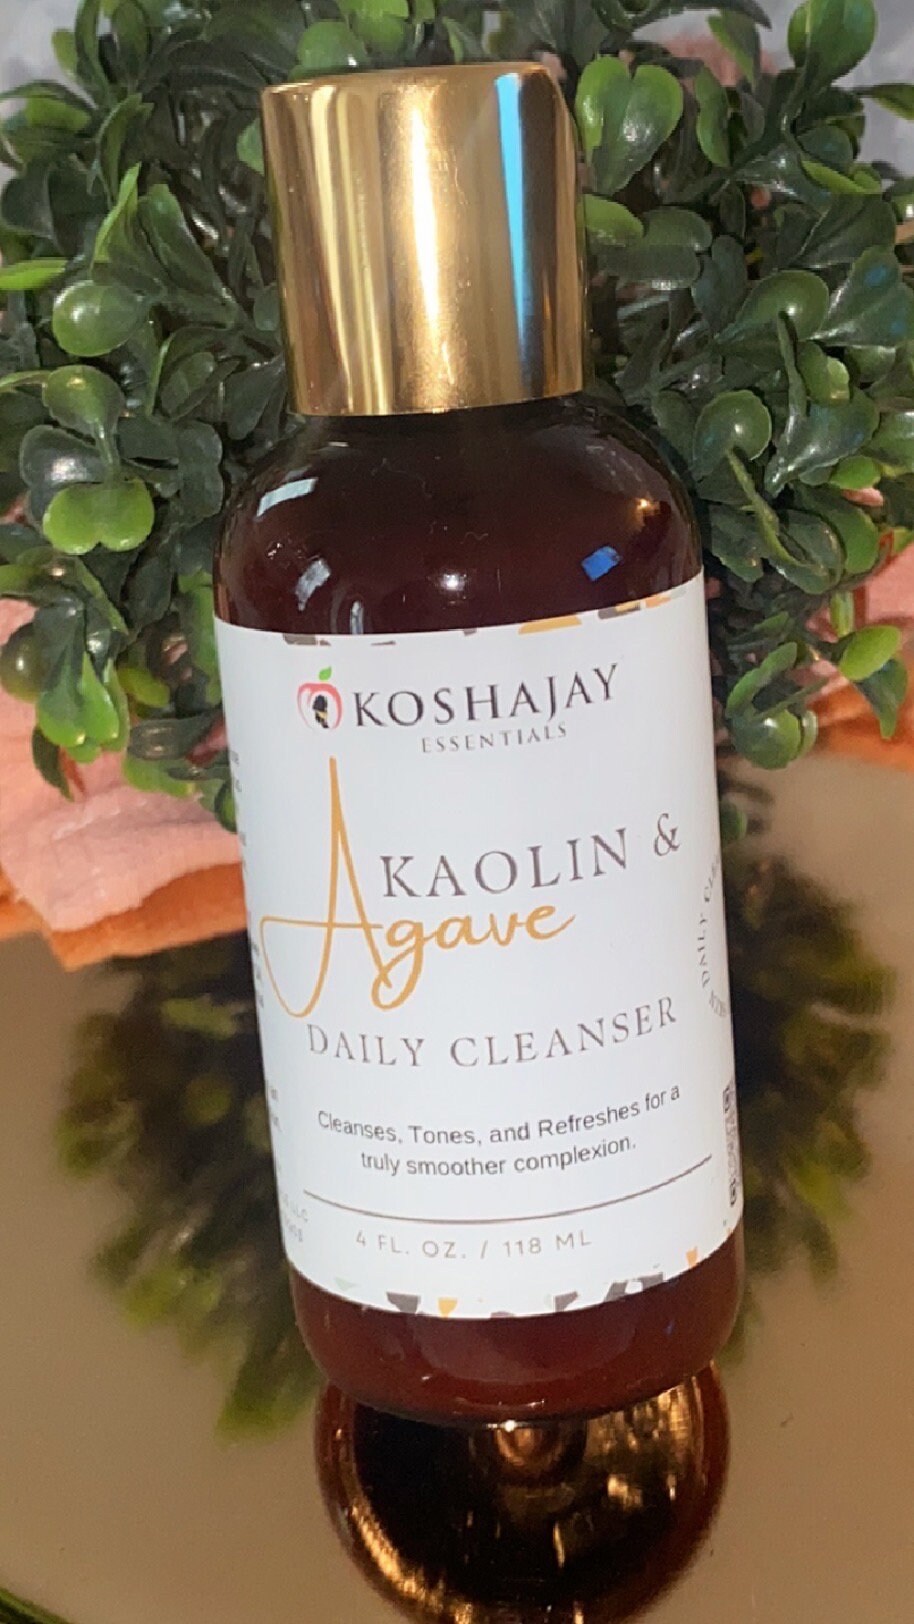 Kaolin & Agave Facial Cleanser Kaolin Clay, Hyaluronic Acid, Rose Extract Deep Cleaning, Detoxing